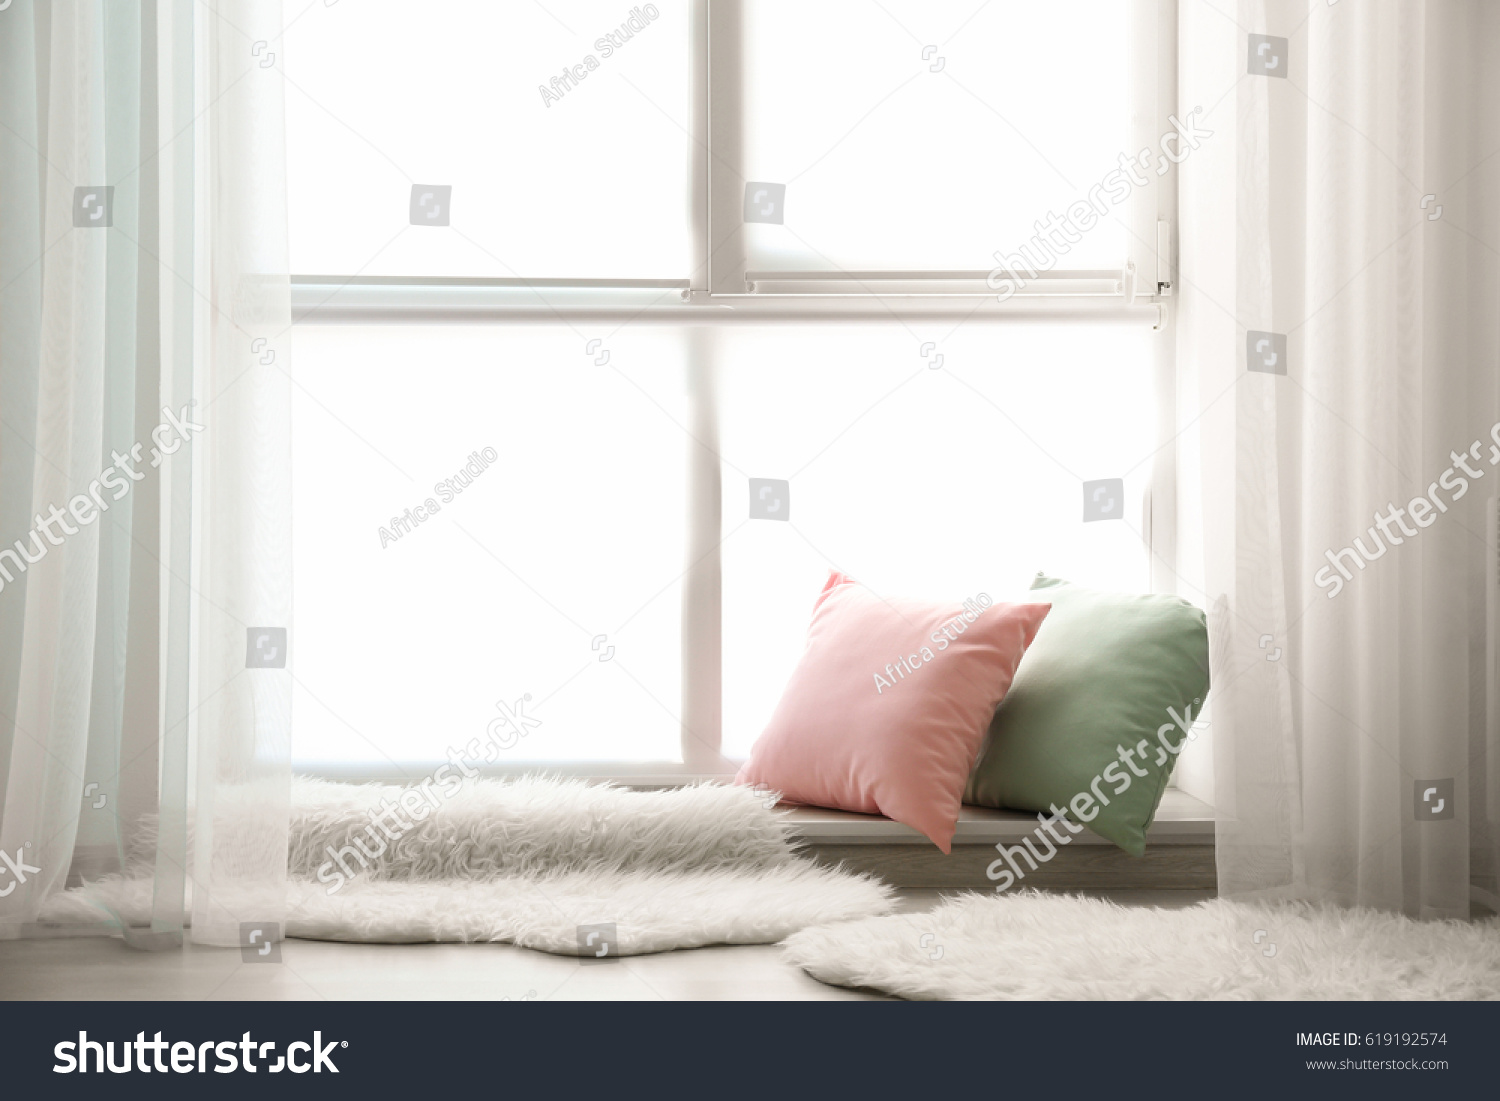 Comfortable place for rest near window #619192574